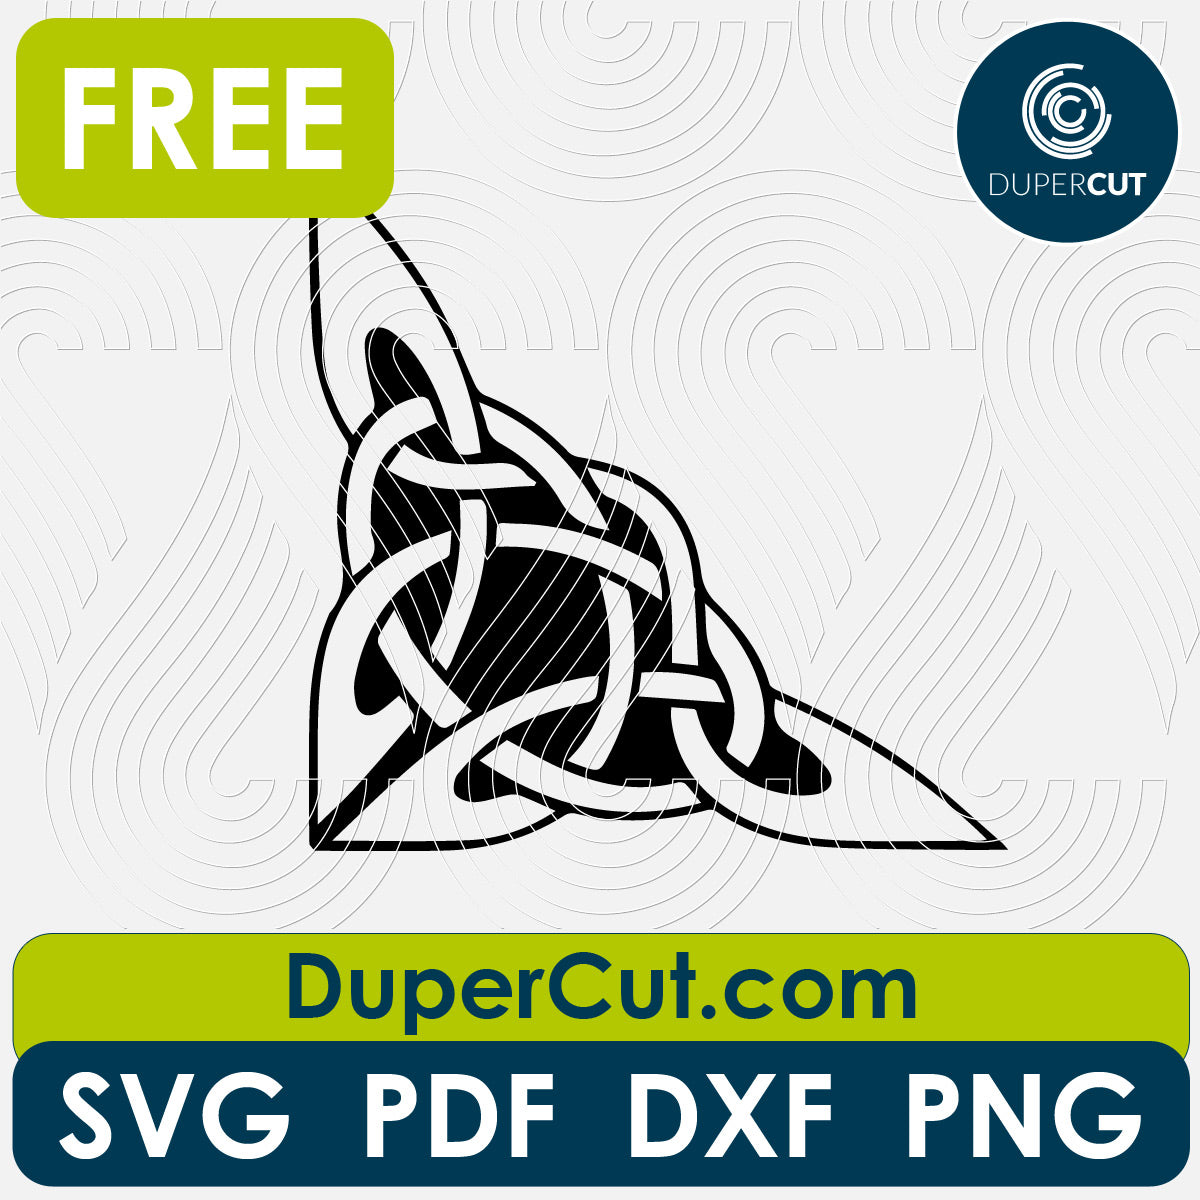 Celtic knot corner design, FREE cutting template SVG PNG DXF files for Glowforge, Cricut, Silhouette, CNC laser router by DuperCut.com